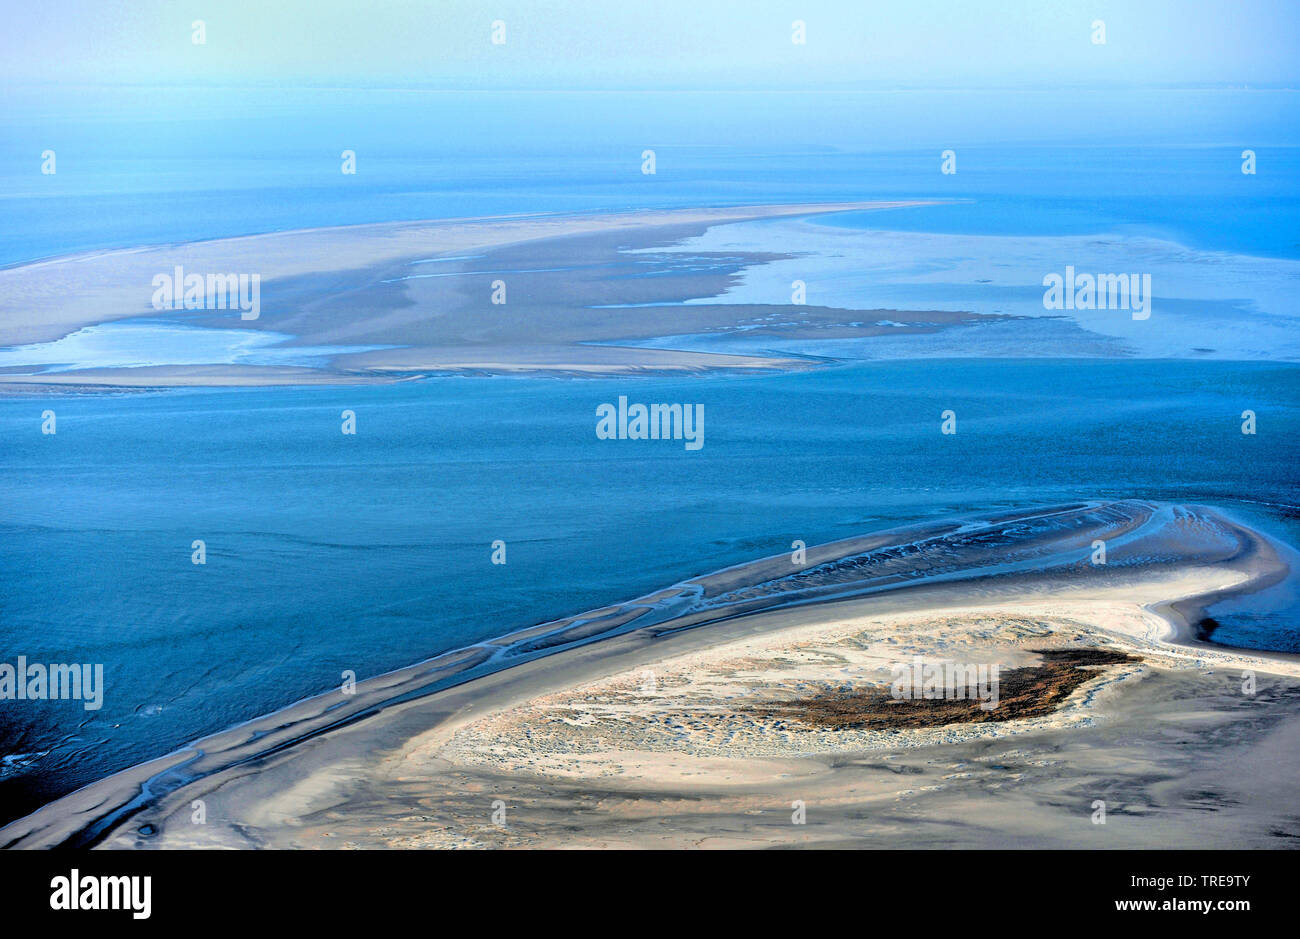 aerial view of sand banks at ebb tide, Germany, Schleswig-Holstein, Schleswig-Holstein Wadden Sea National Park, Norderoogsand Stock Photo